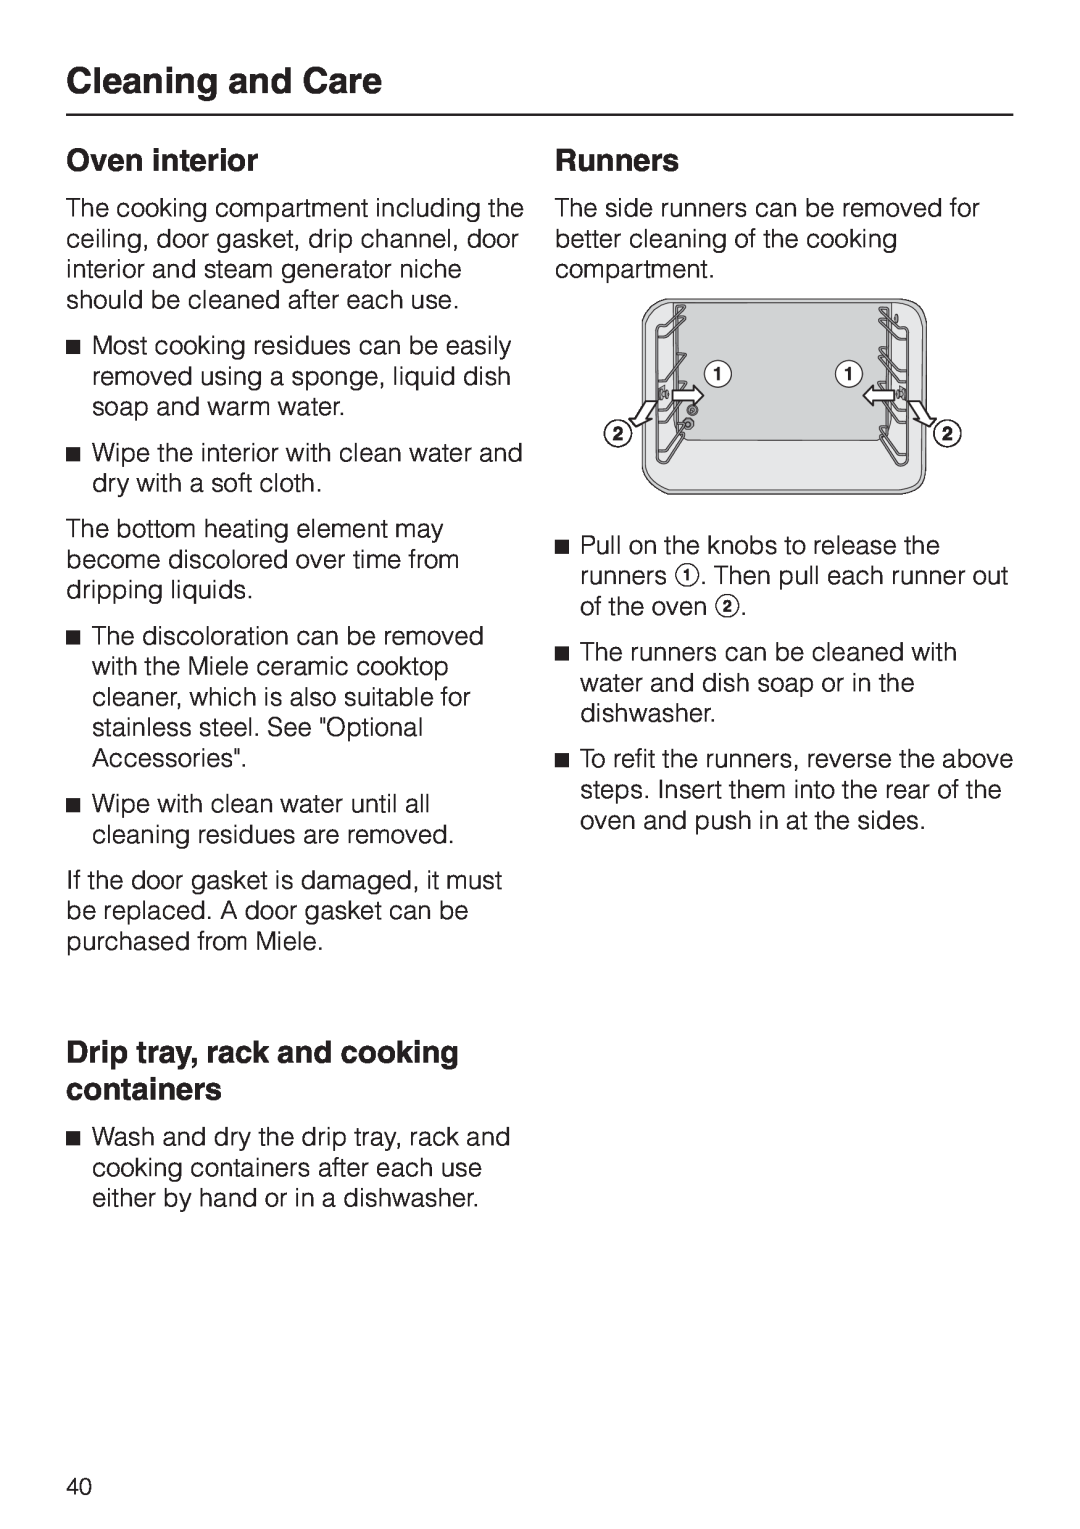 Miele DG 2661 installation instructions Oven interior, Runners, Drip tray, rack and cooking containers, Cleaning and Care 